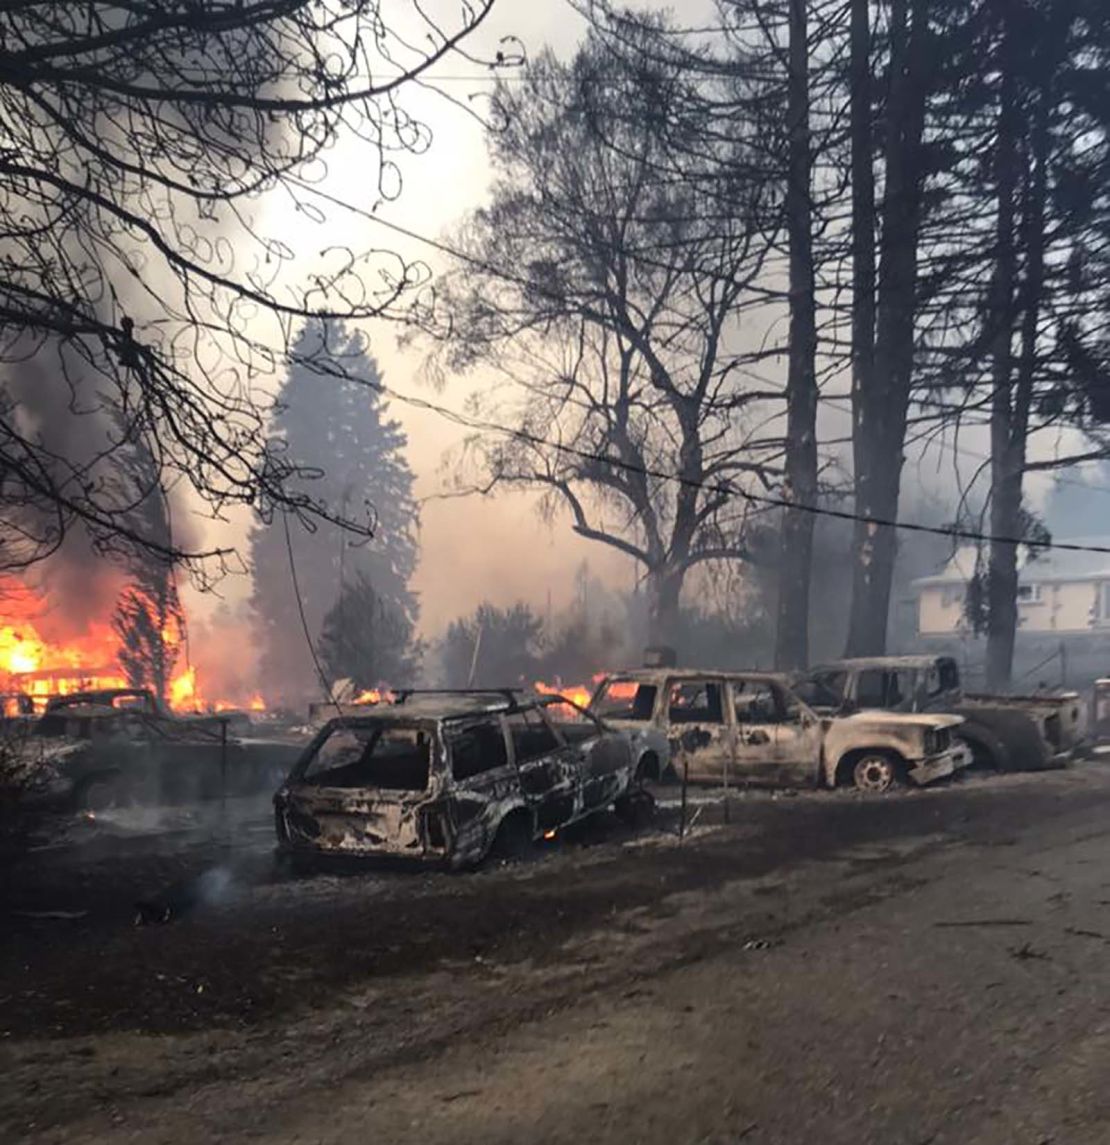 Malden, Washington was devastasted by a wildfire that swept through the area.